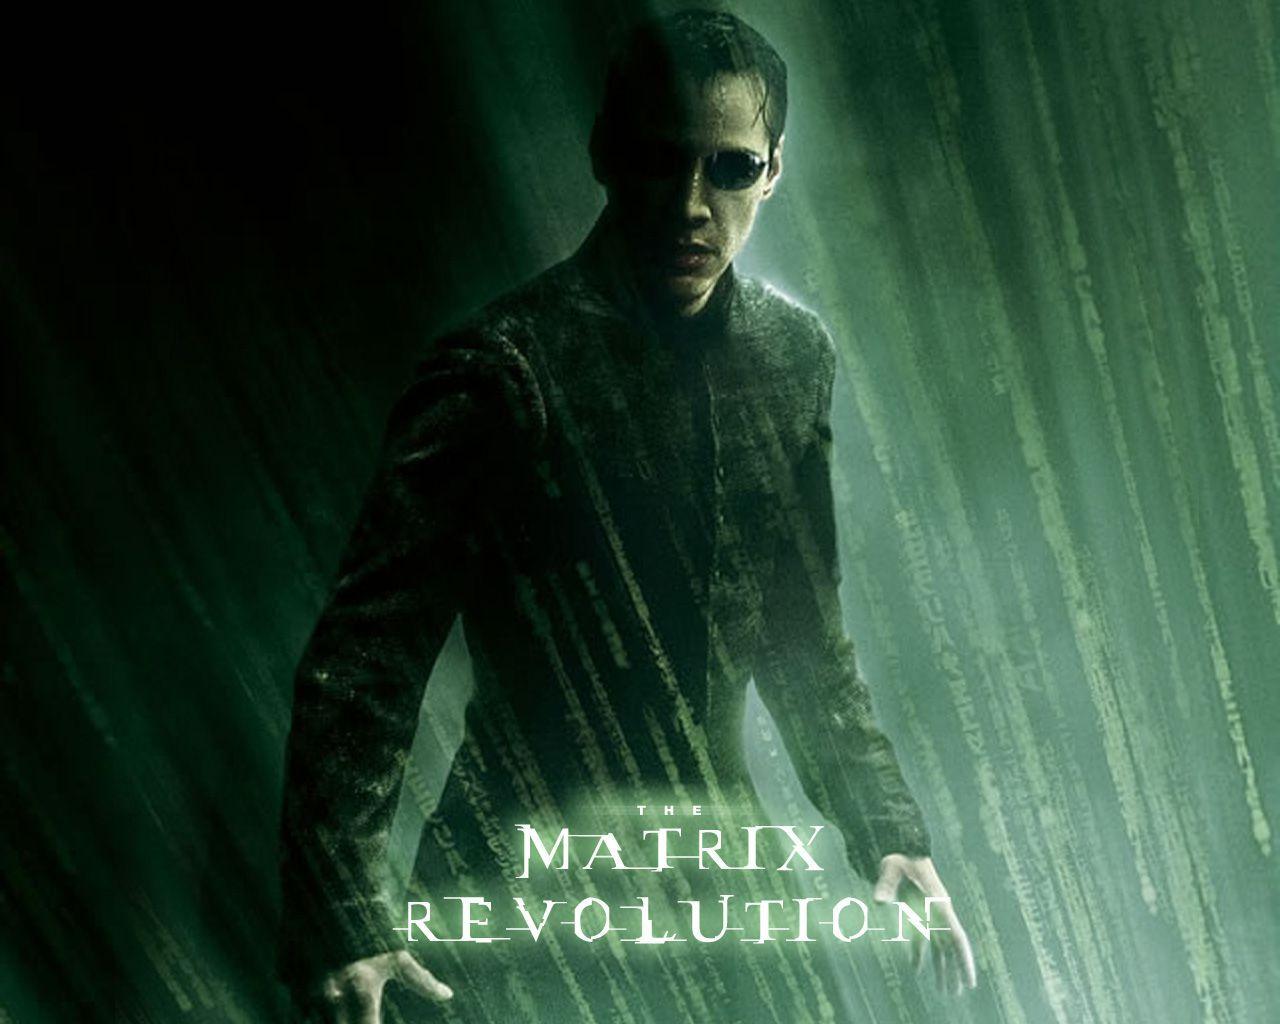 The Wachowskis discuss the meaning of The Matrix Trilogy